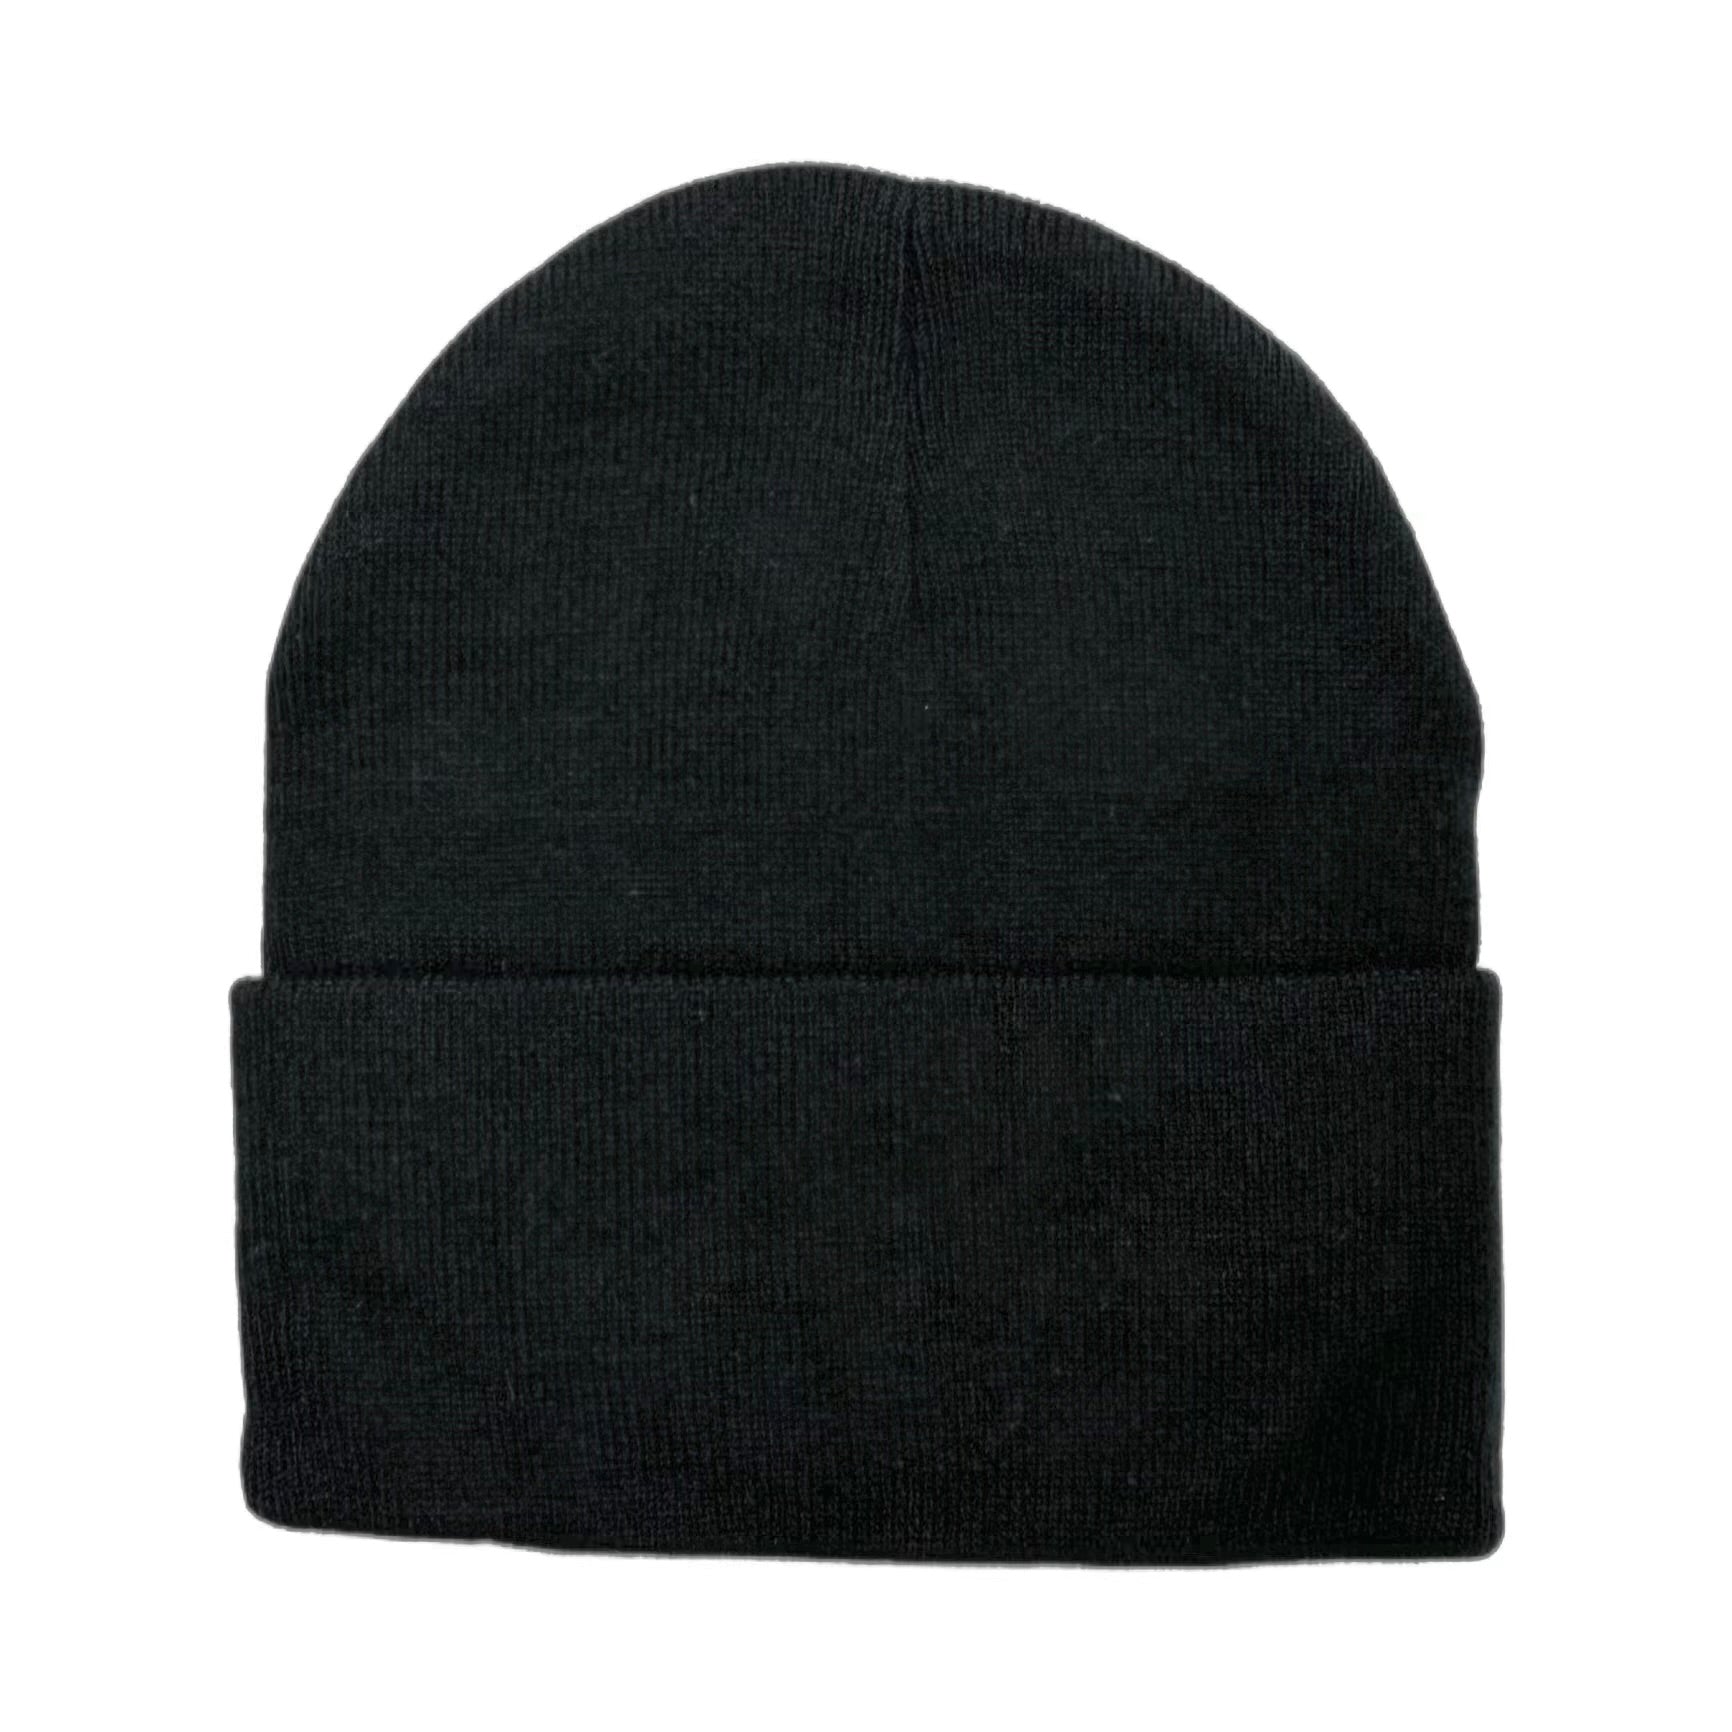 TFashion Solid Color Beanies (Black/Charcoal Grey/Heather Grey/Navy/Brown)